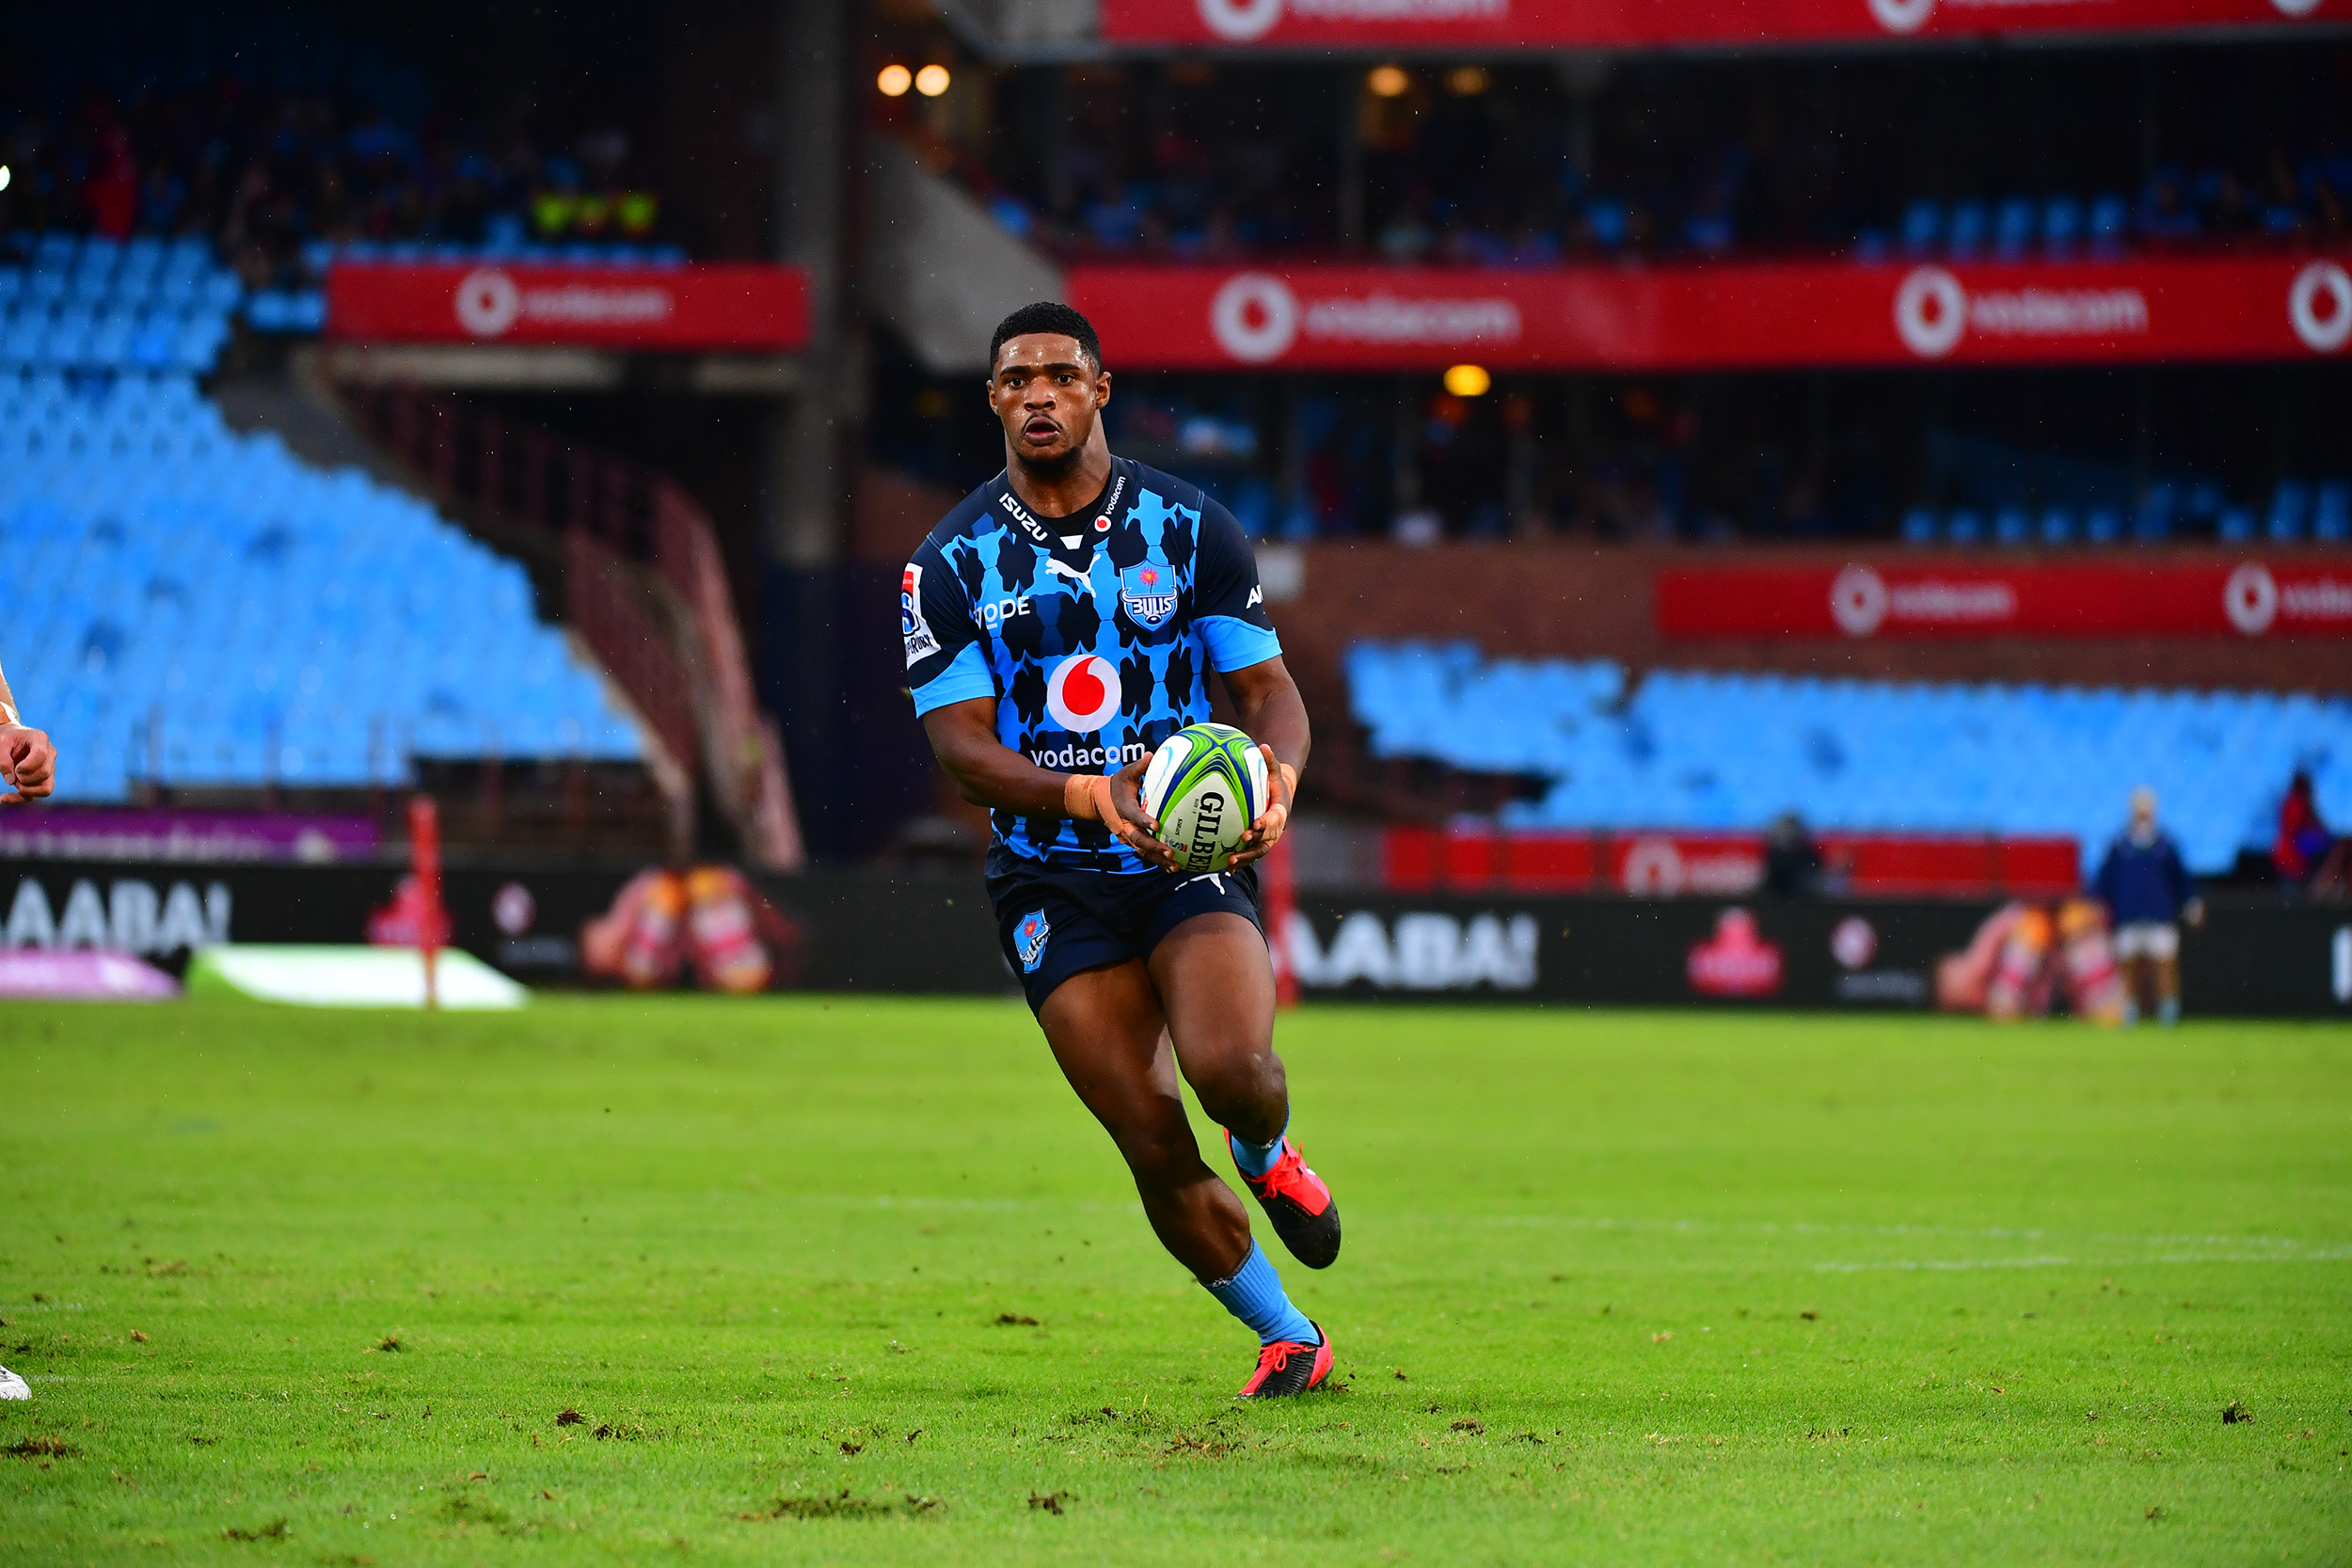 Gelant marks 50th cap with Tuitavake set for Vodacom Bulls debut